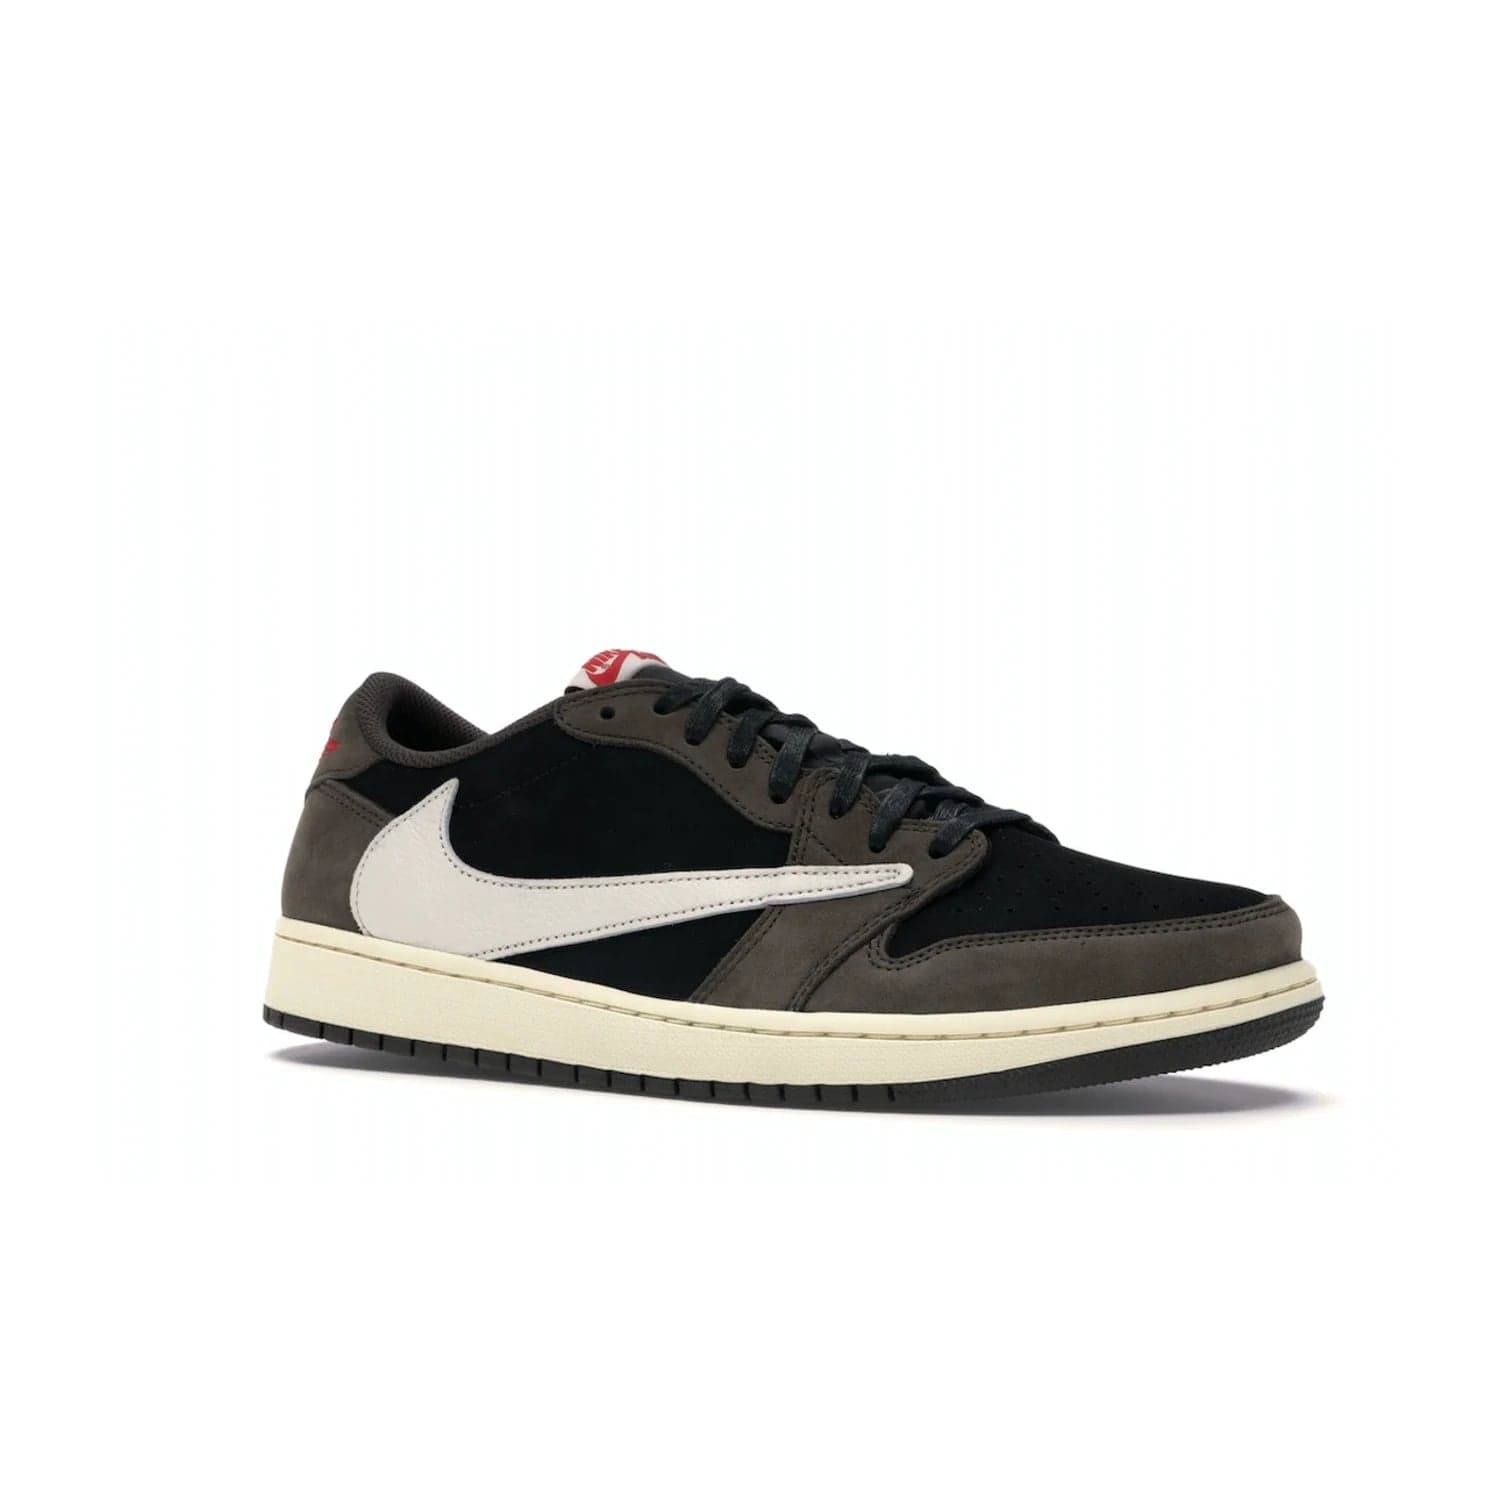 Jordan 1 Retro Low OG SP Travis Scott - Image 4 - Only at www.BallersClubKickz.com - The Air Jordan 1 Low Travis Scott combines modern and classic design elements for a stylish look. It features a black upper with dark brown overlays, red accents, sail midsole, and dark brown outsole. Signature touches include a backwards Swoosh logo and “Cactus Jack” inscriptions. Released in July 2019.